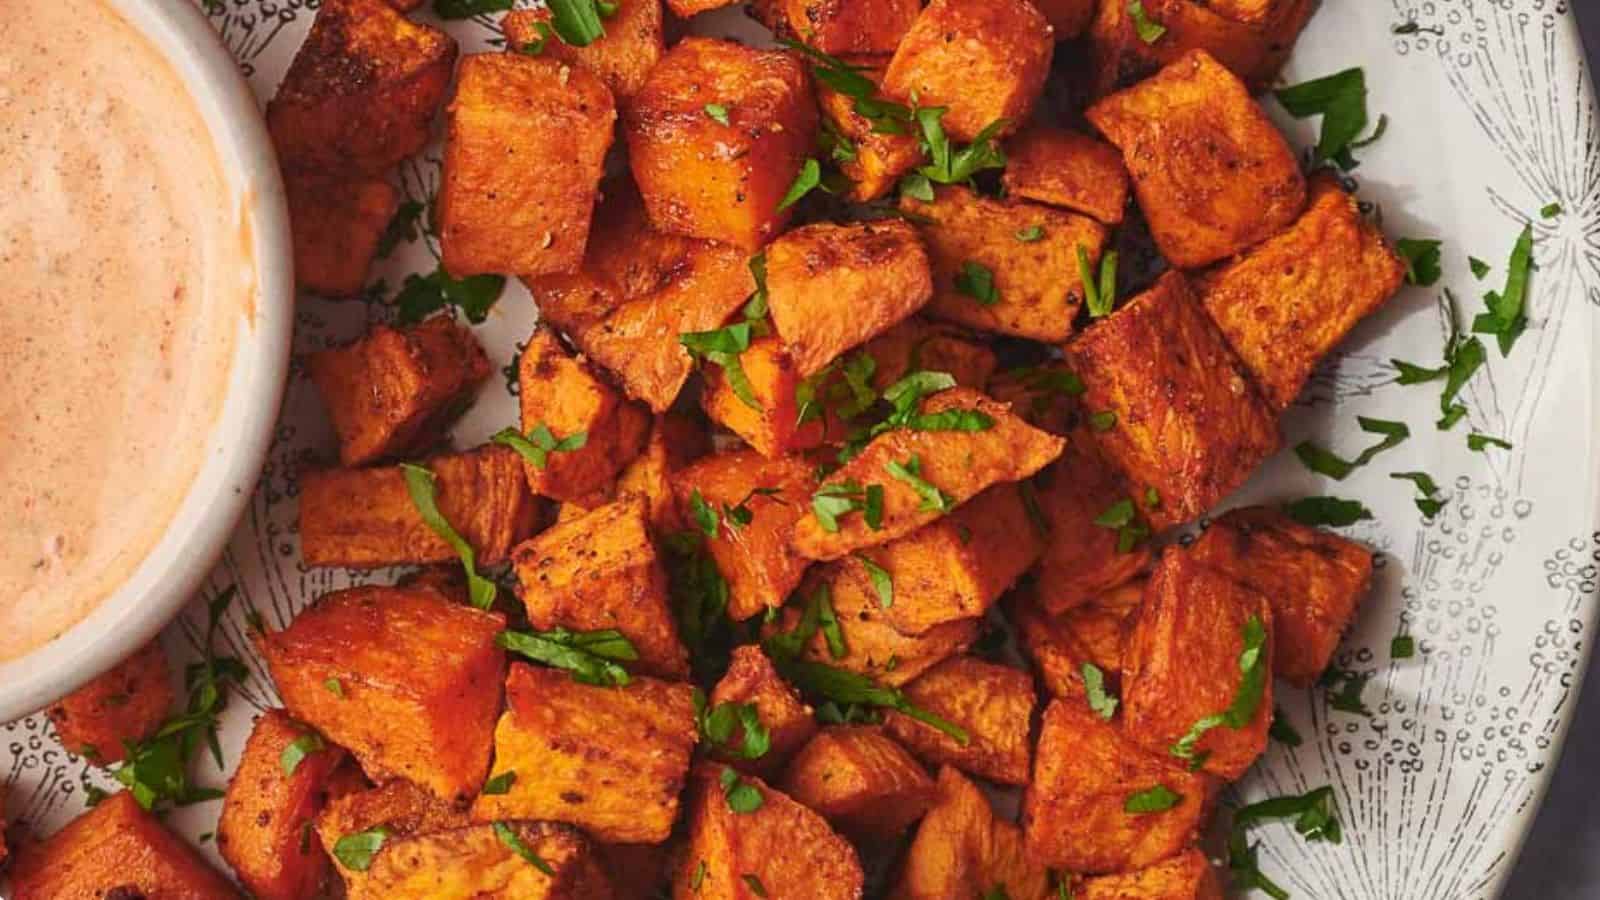 Sweet potato cubes on a plate with a dipping sauce.